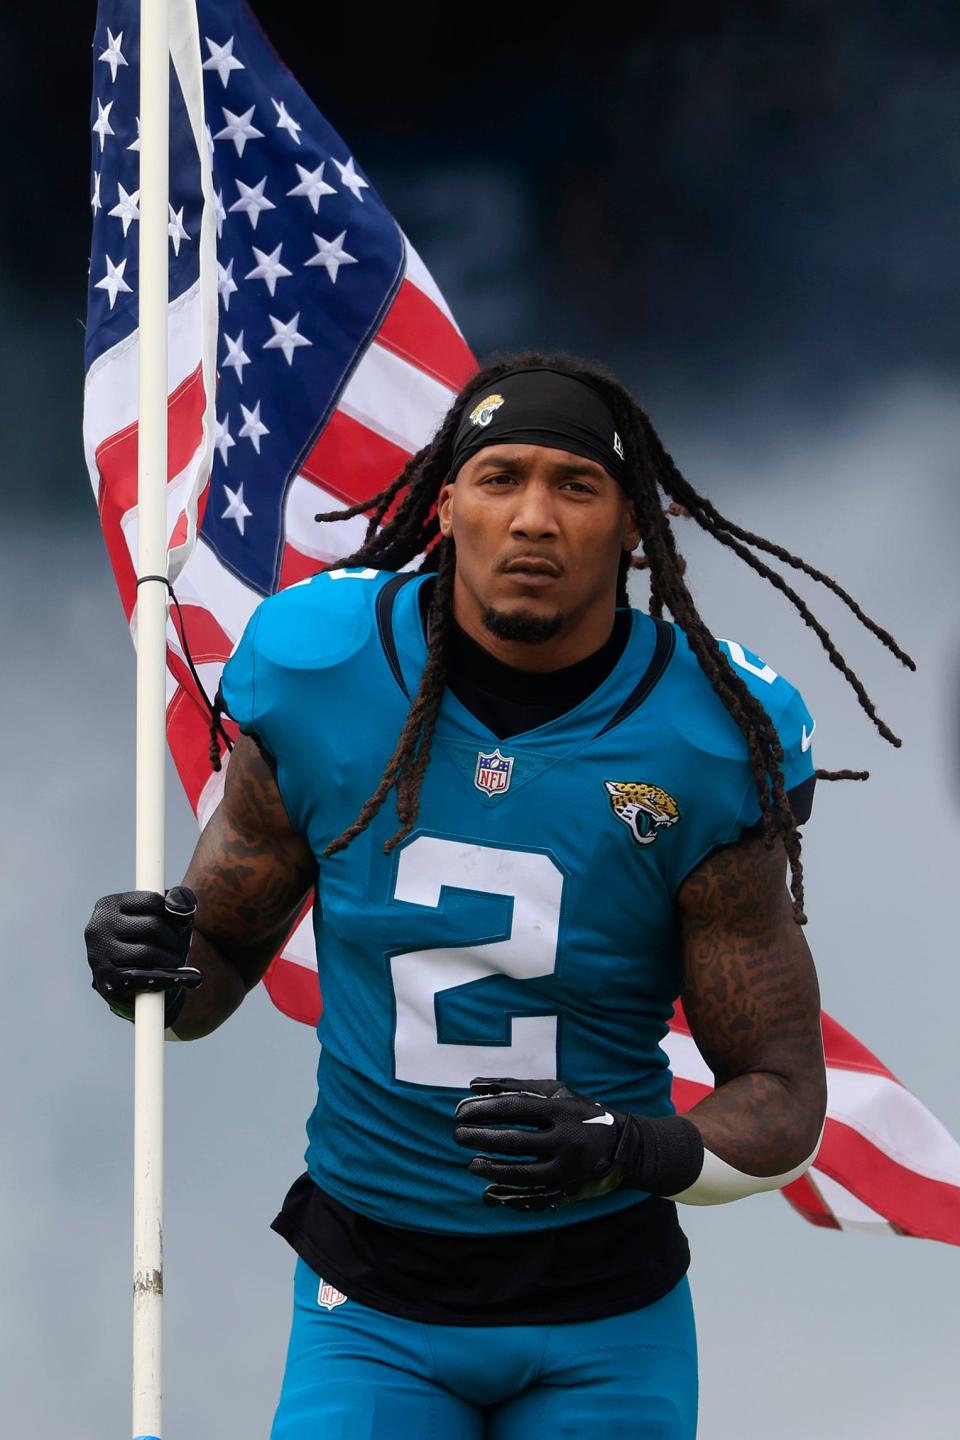 Jacksonville Jaguars safety Rayshawn Jenkins (2) takes to the field with the U.S. flag, during Salute to Service recognition, before a regular season NFL football matchup Sunday, Nov. 6, 2022 at TIAA Bank Field in Jacksonville. The Jacksonville Jaguars held off the Las Vegas Raiders 27-20. [Corey Perrine/Florida Times-Union]